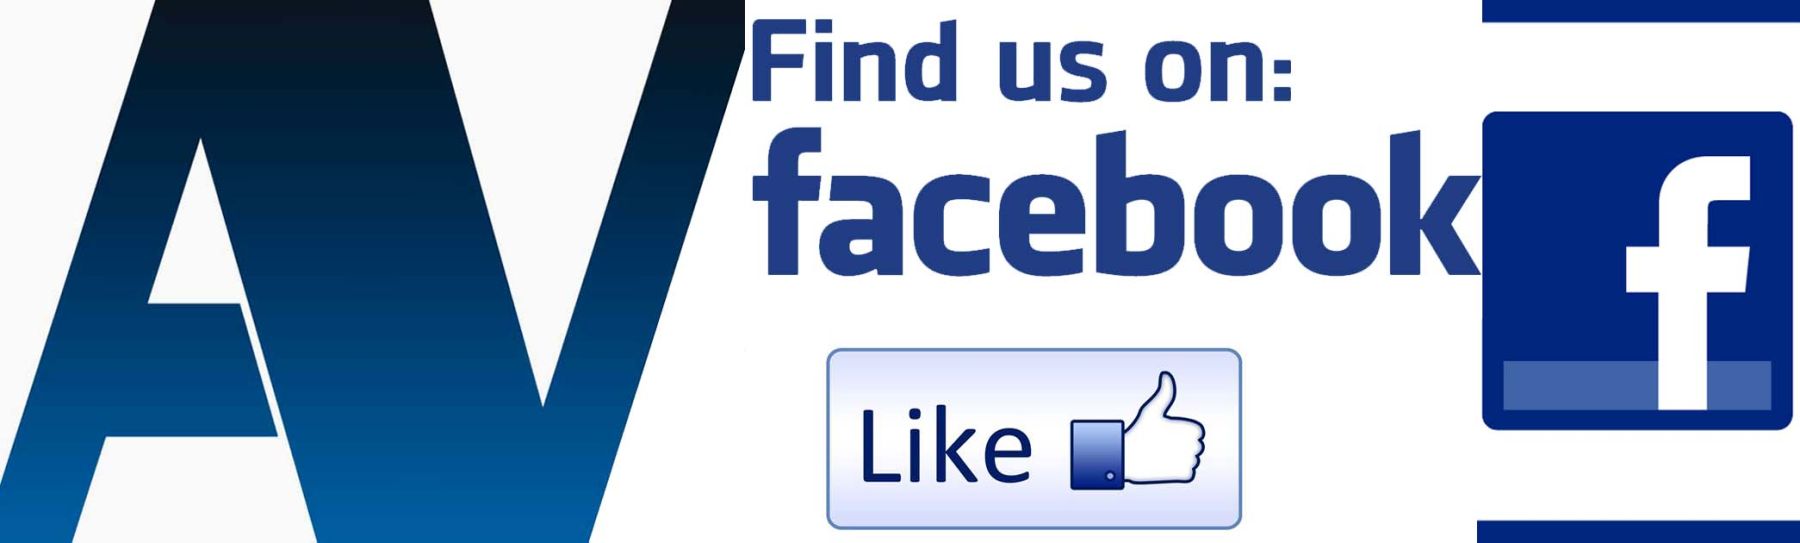 We Are Now on Facebook - Check in and Give Us a Li